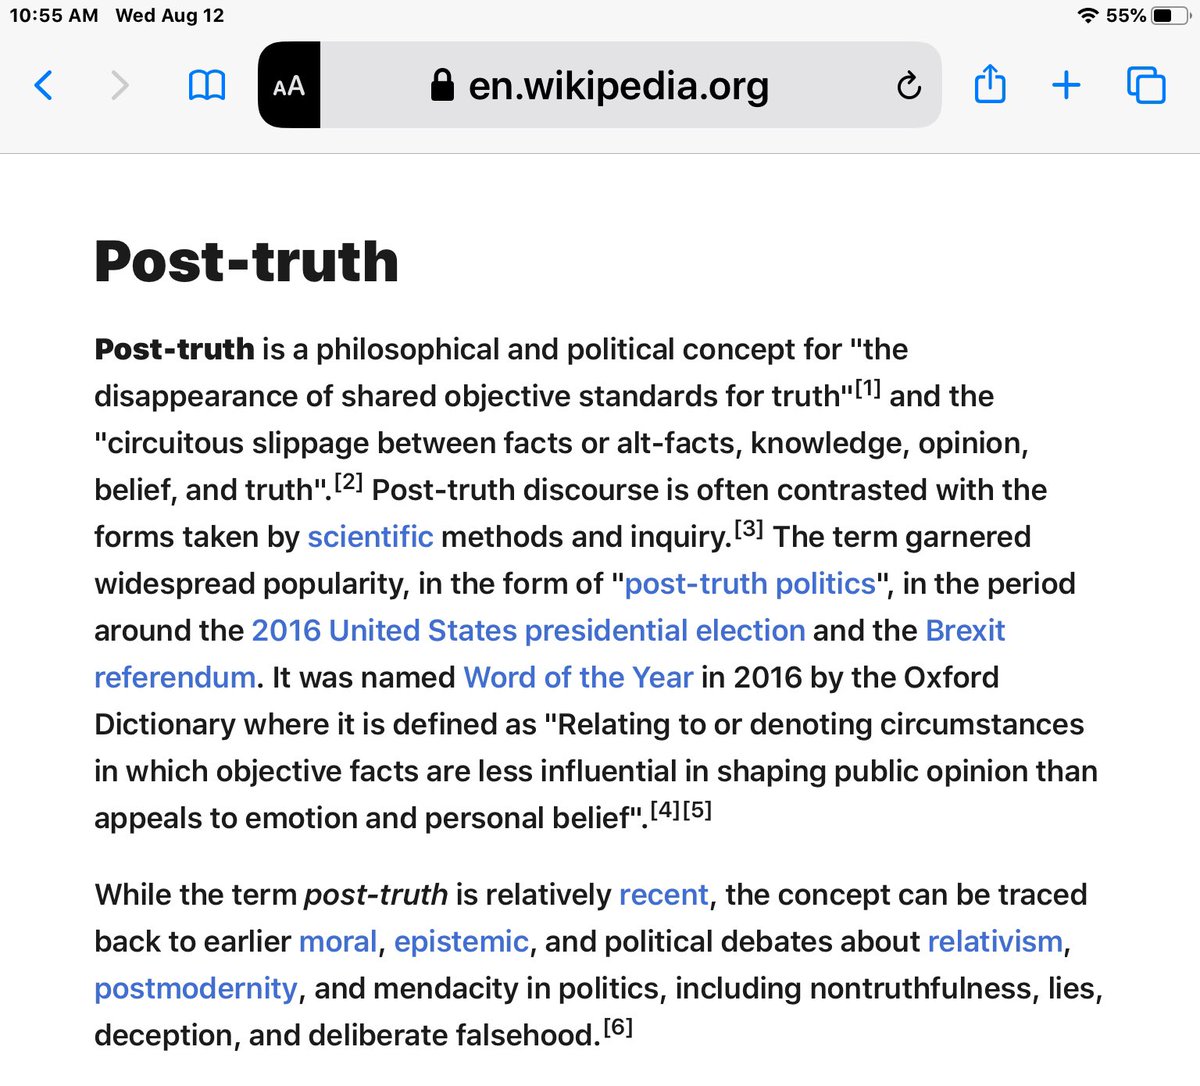 There is absolutely no excuse for MSM dropping the ball. There is a reason though. Most MSM and several network media sites are severely polarized in coverage. Perspective is skewed towards support of political ideology. Characteristics of a post truth environment.